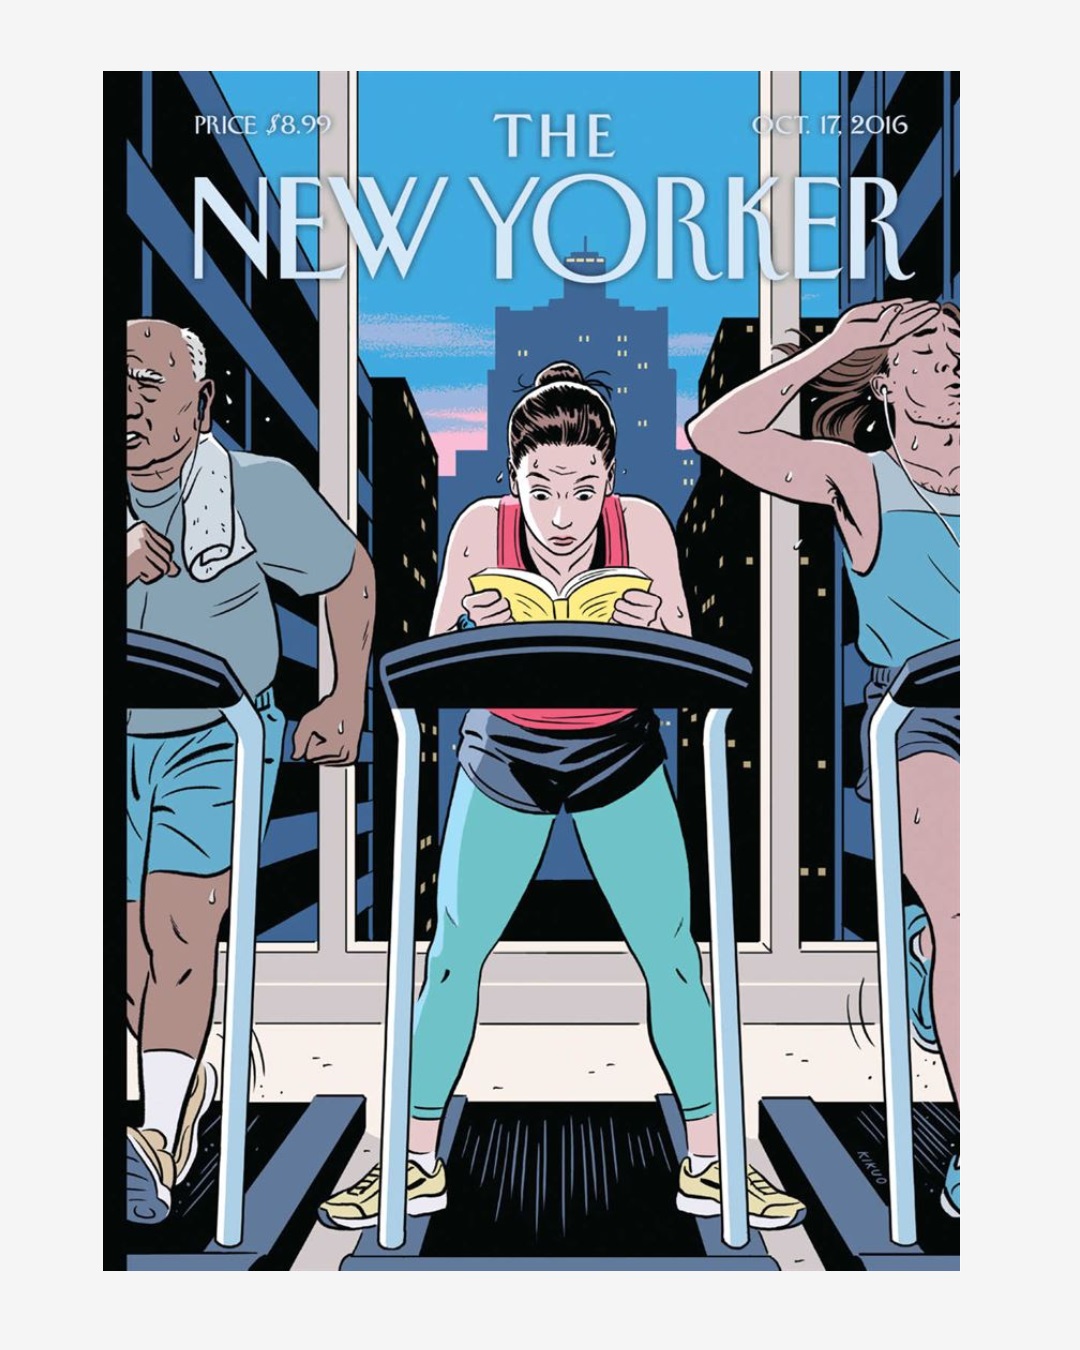 Card with treadmill and New Yorker on